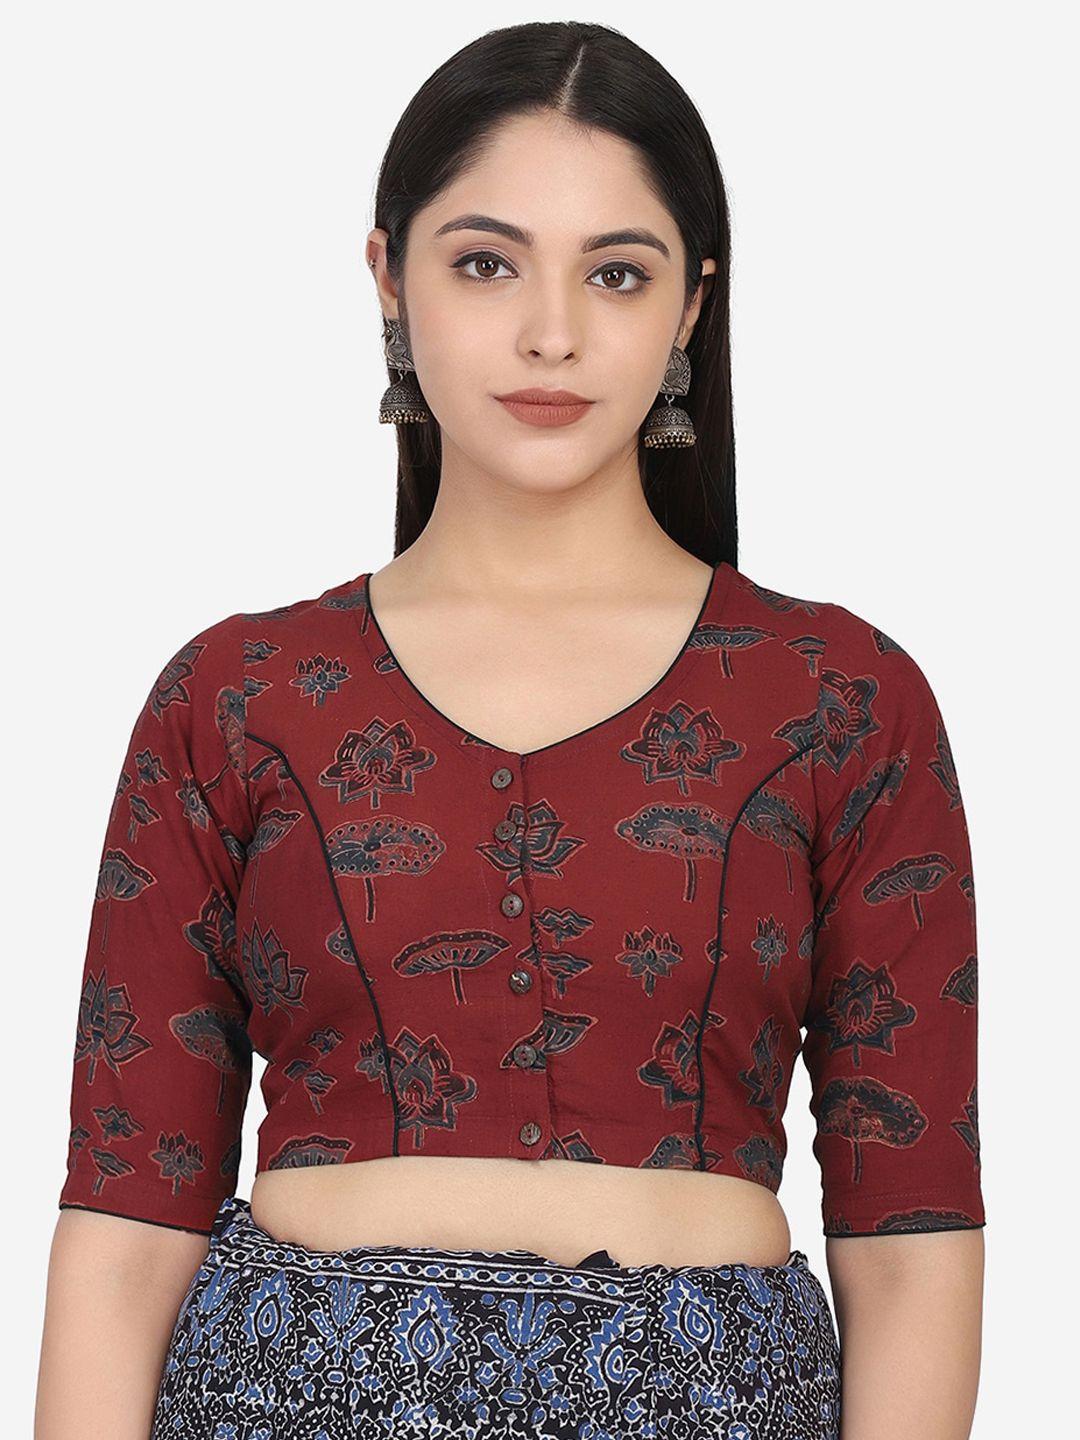 the-weave-traveller-women-maroon-&-blue-printed-cotton-saree-blouse